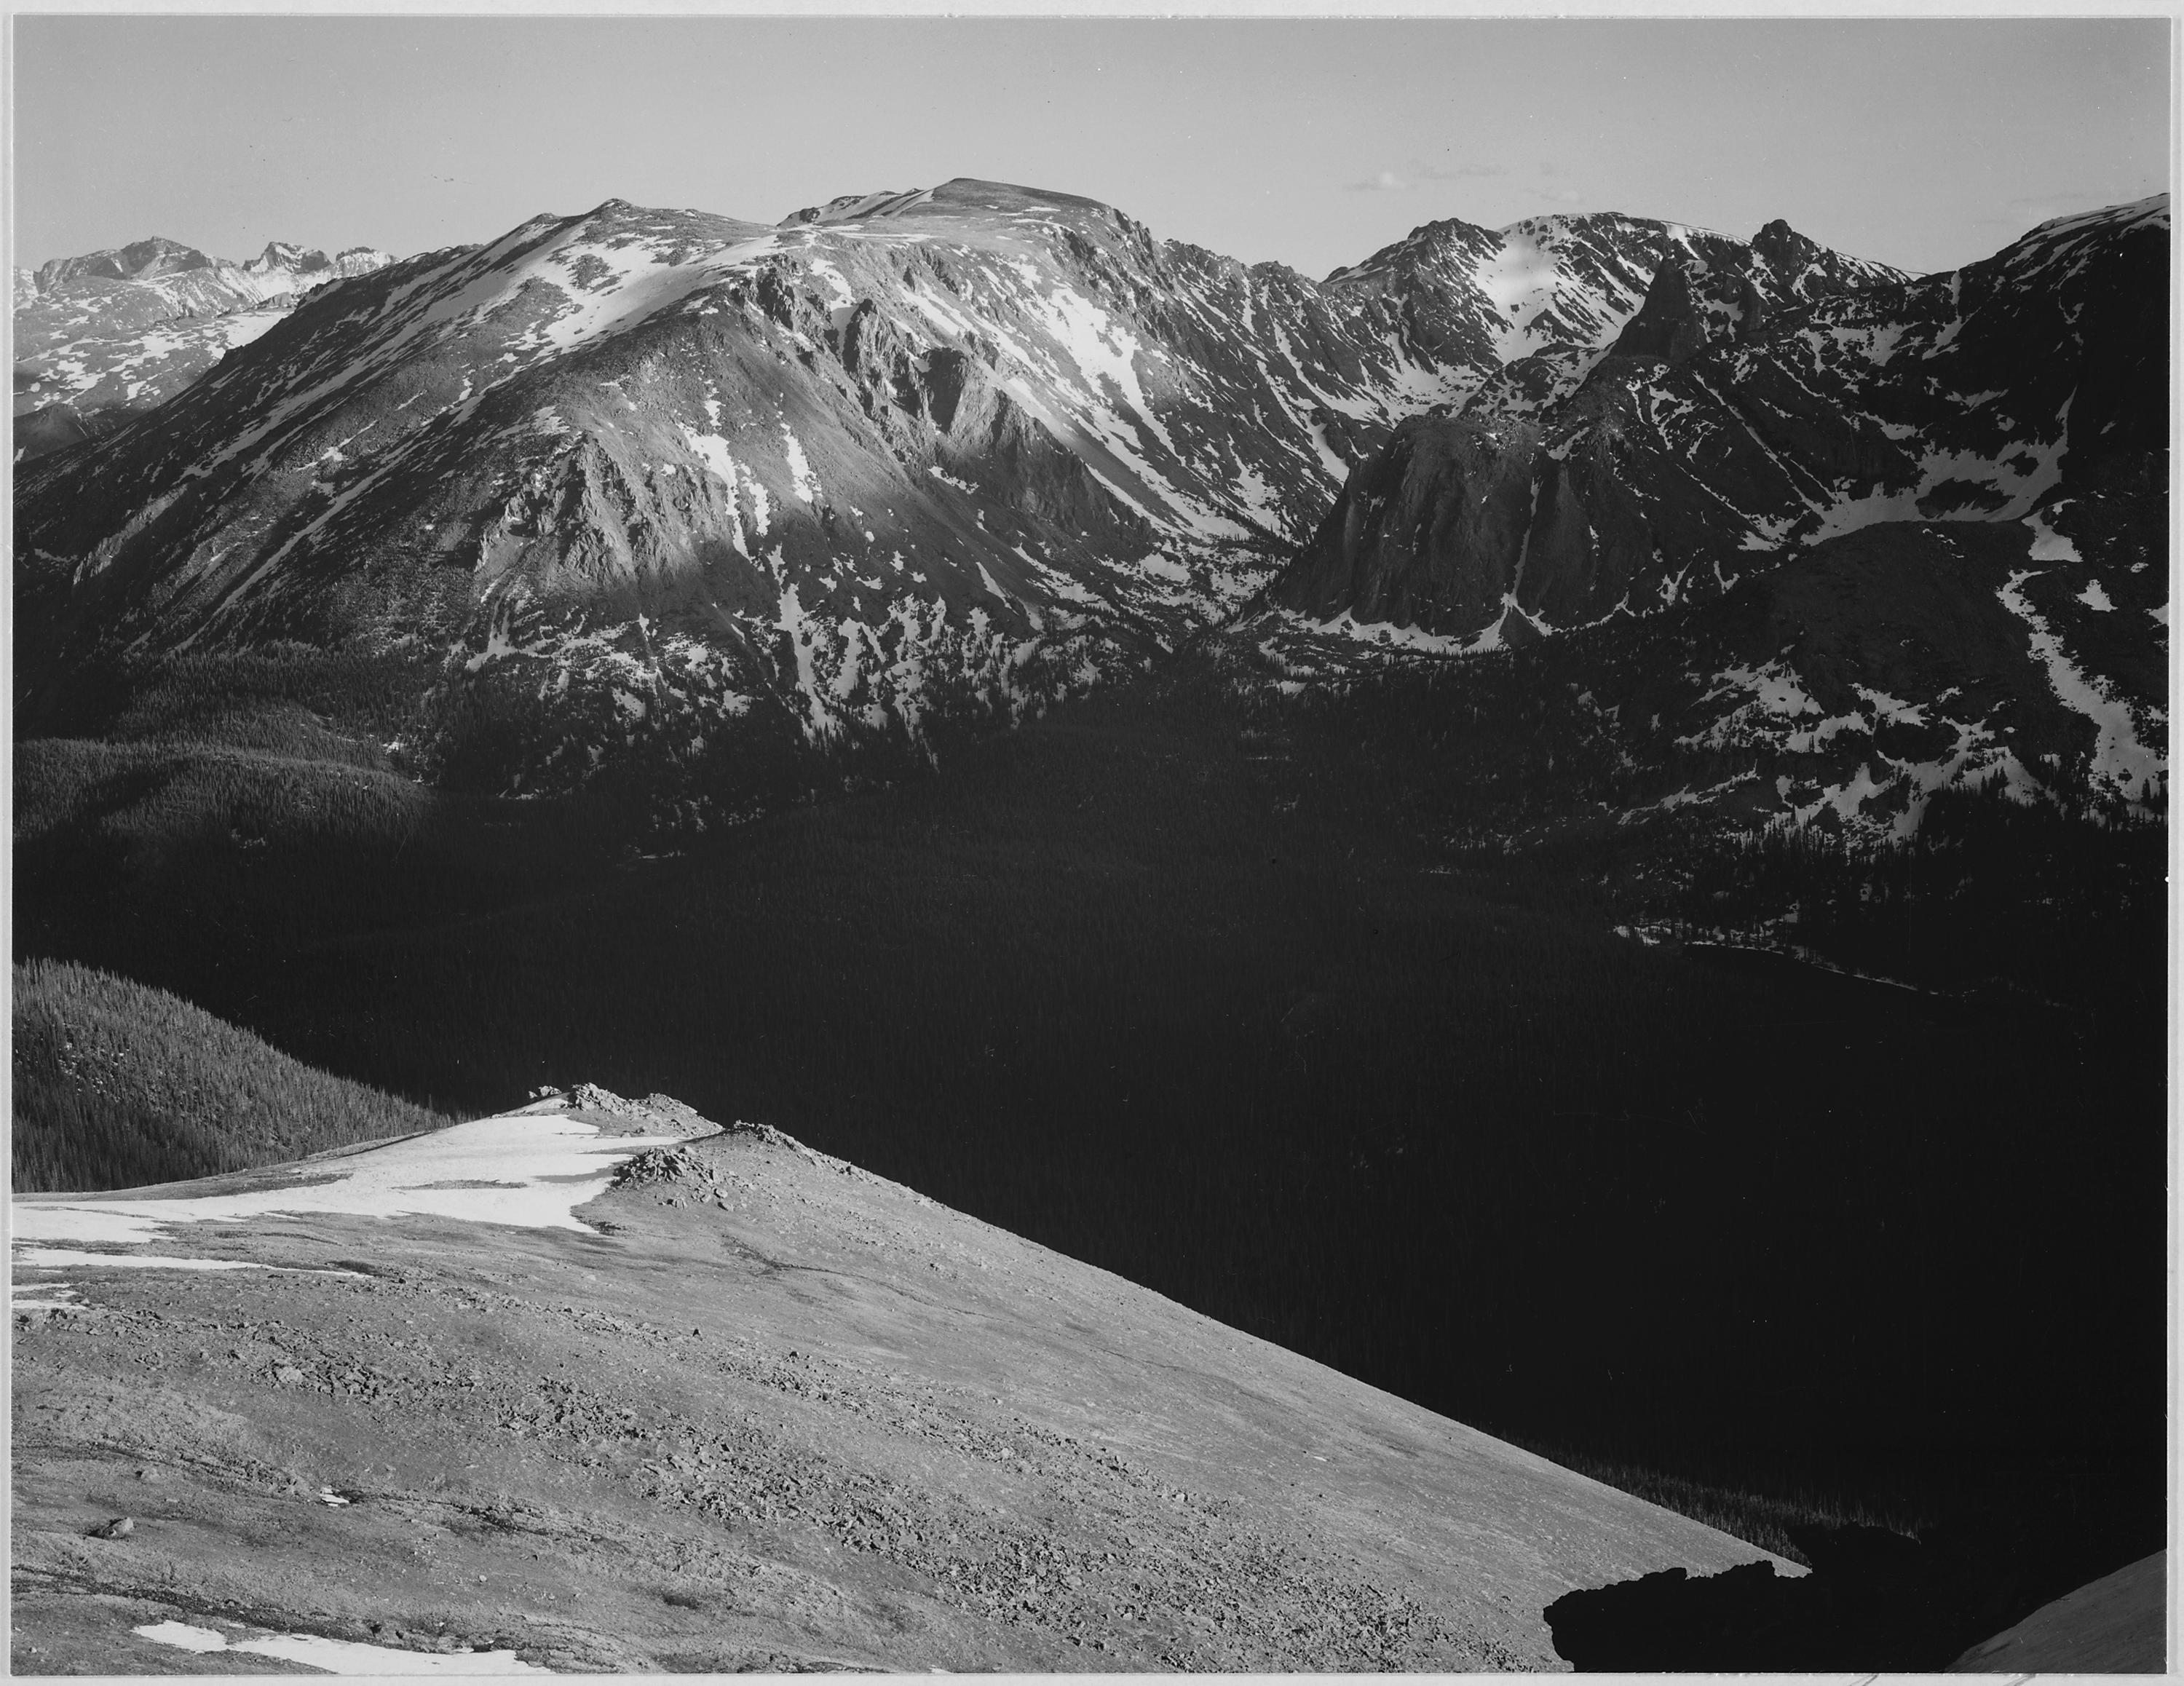 Ansel Adams - National Archives 79-AA-M11